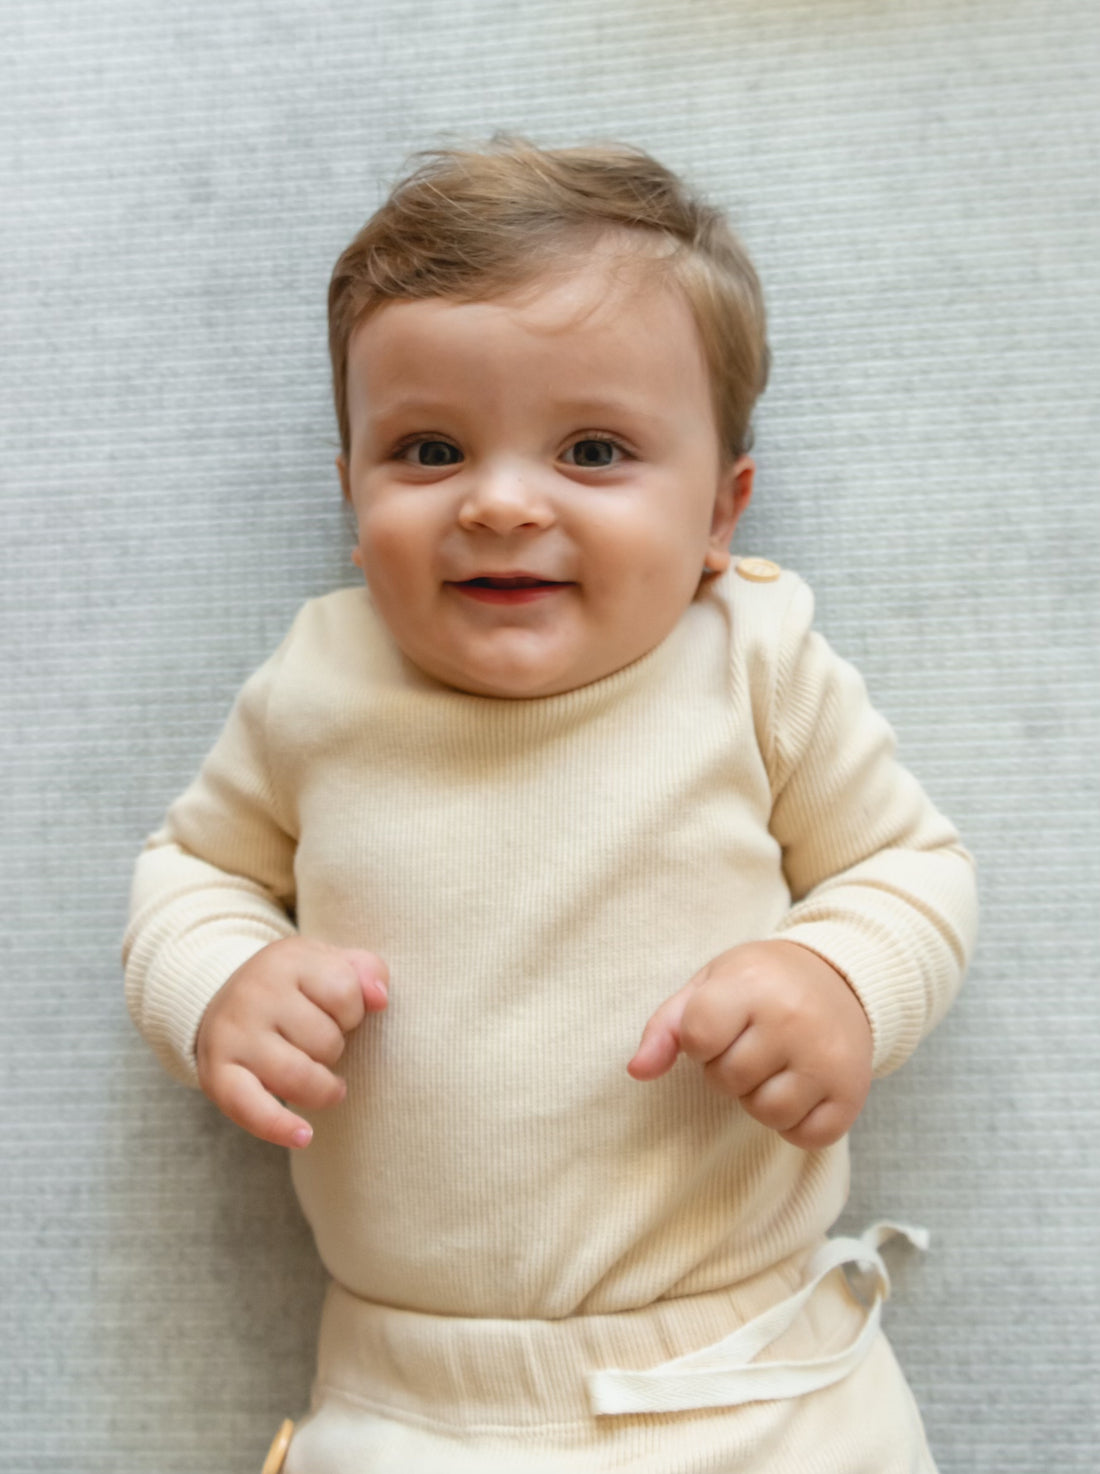 BASICS THICK Ribbed Onesie/Top - ALMOND